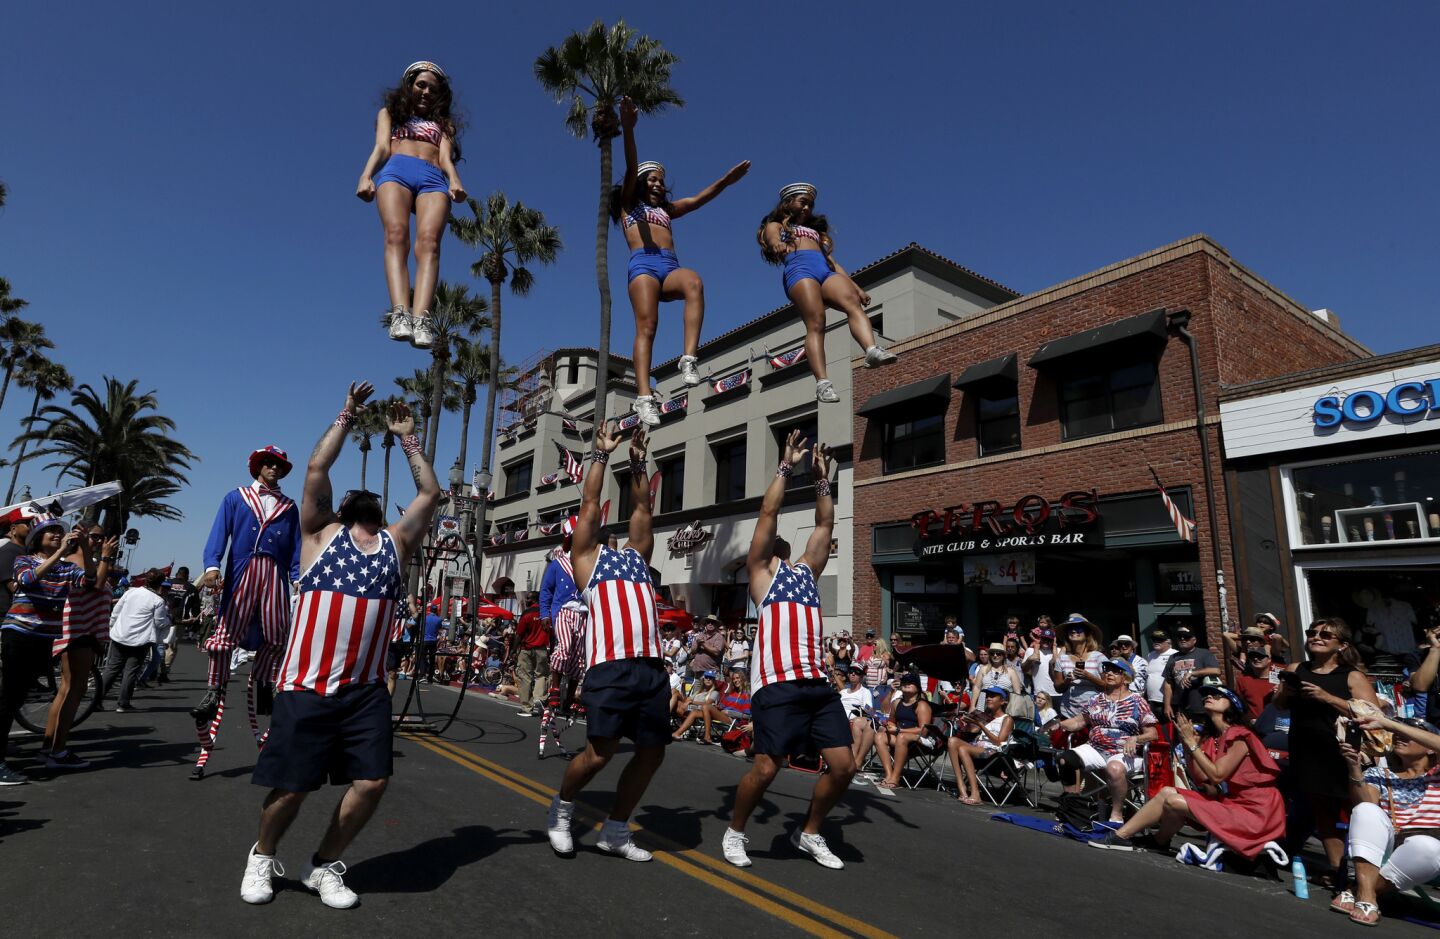 A drill team performs on Main Street during the annual Independence Day Parade in Huntington Beach.